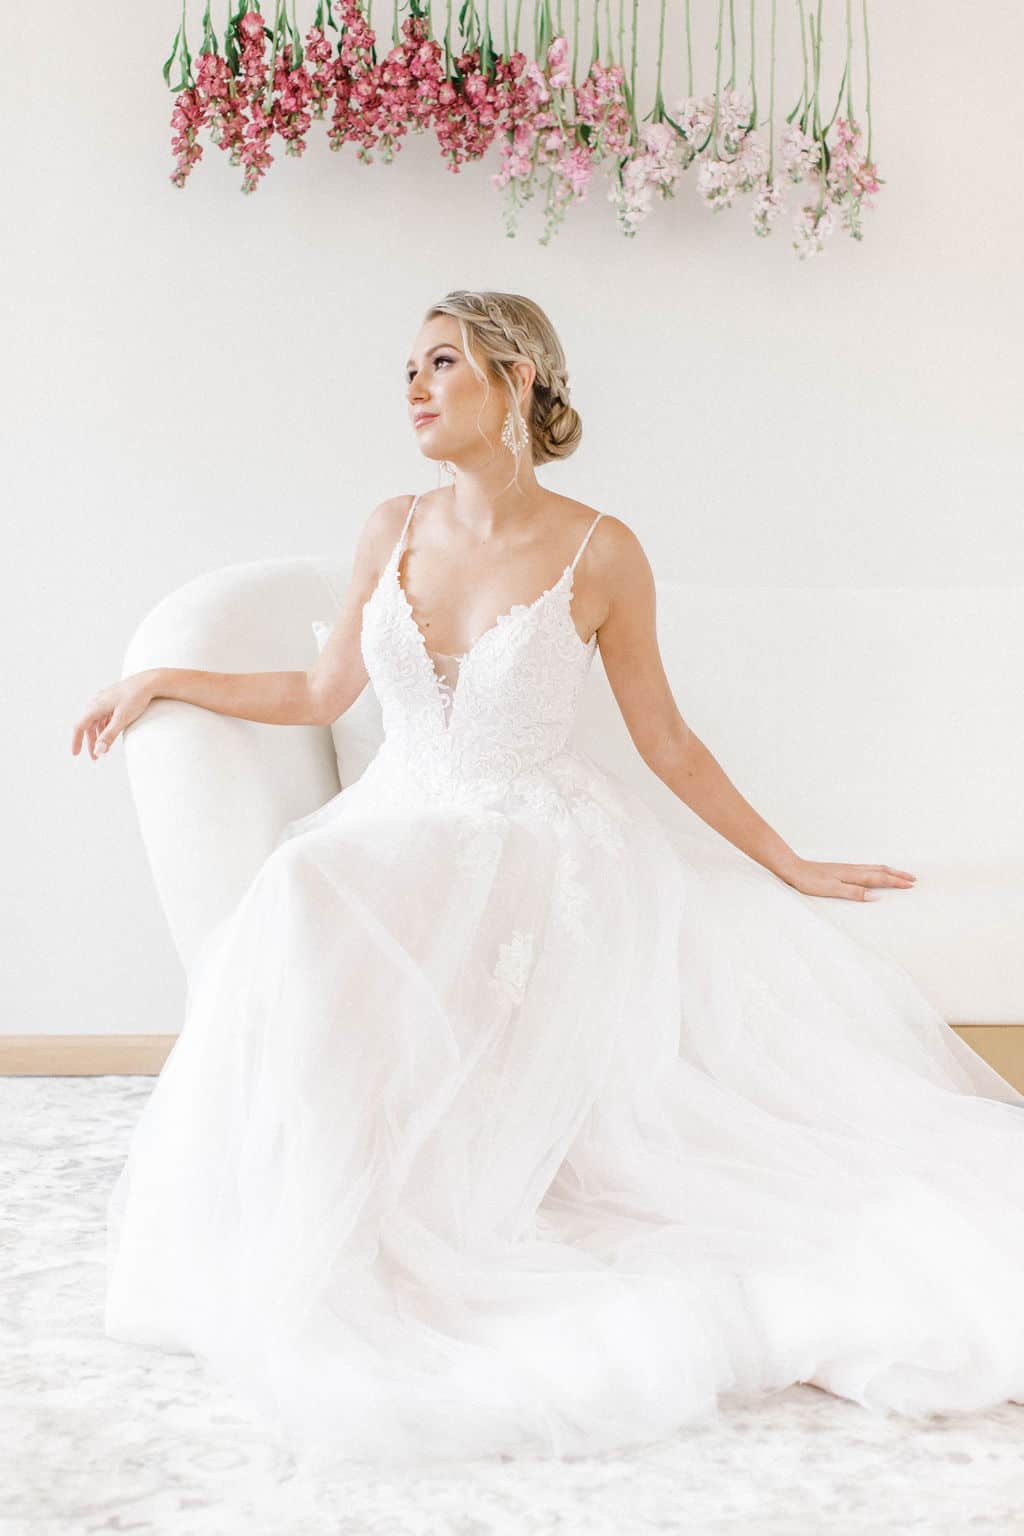 Wedding Dress Rental In Hong Kong: Where To Rent A Bridal Gown